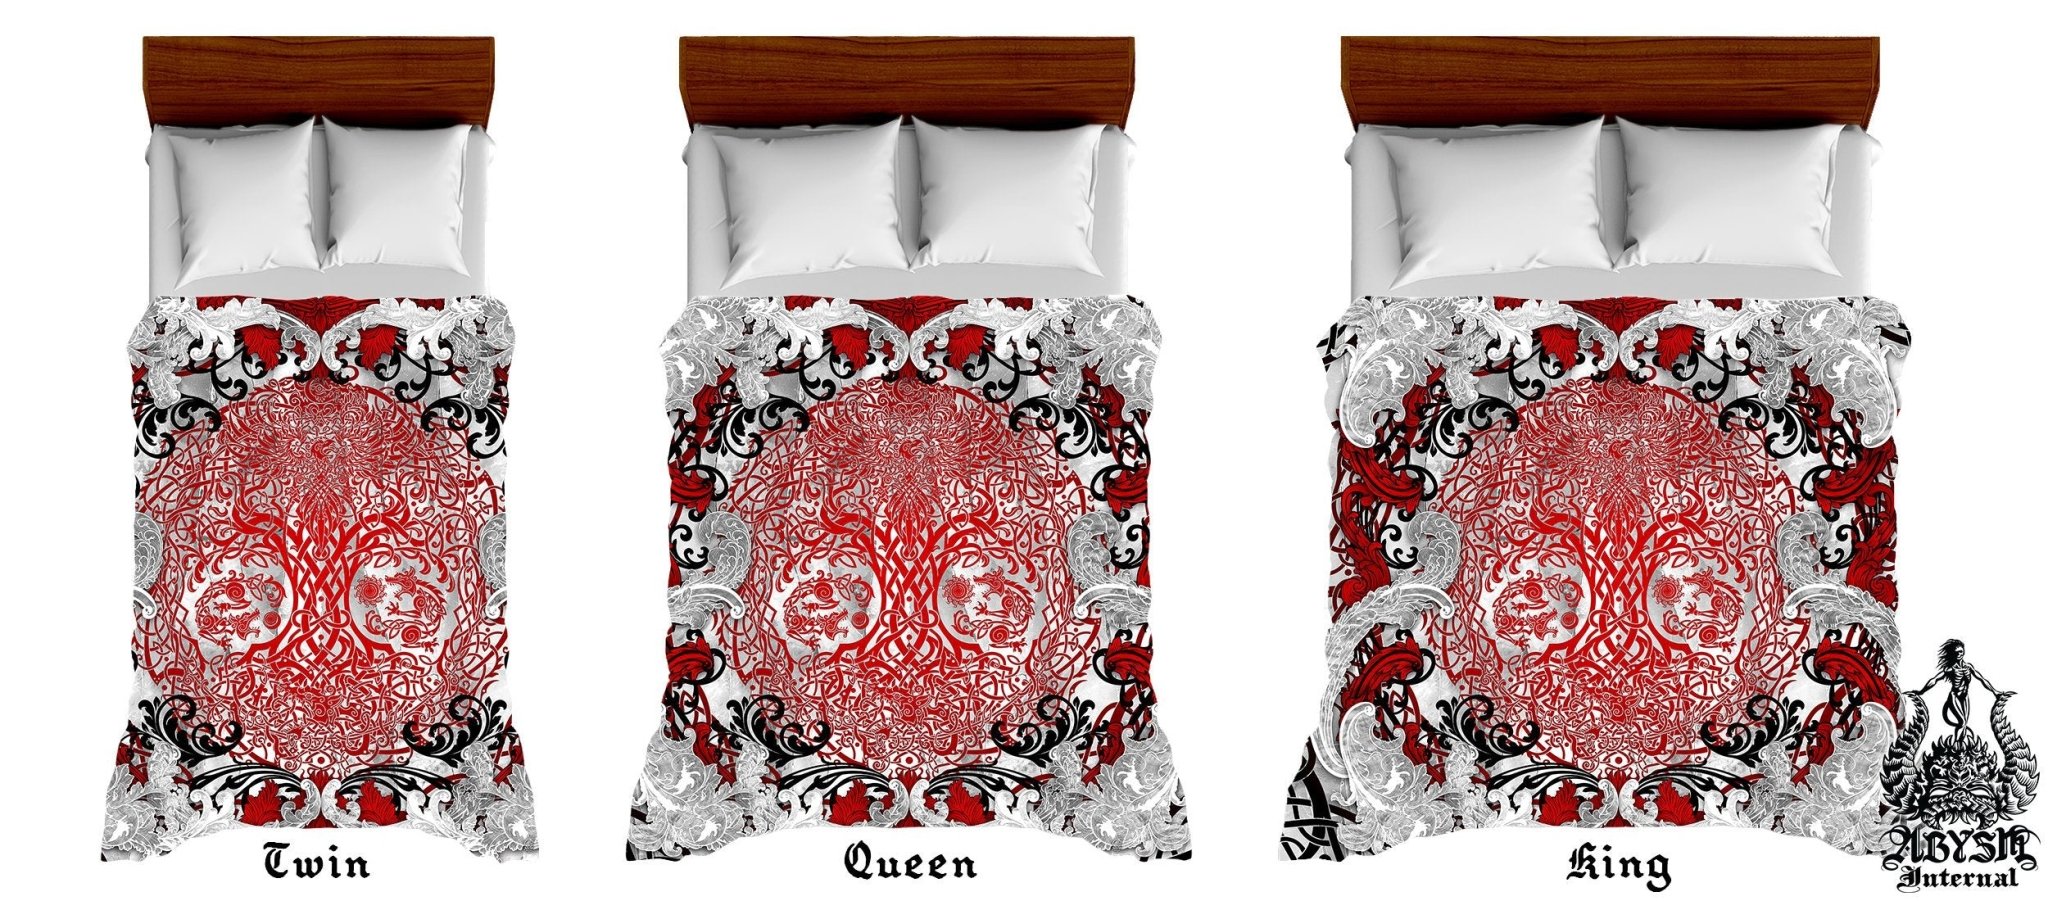 Viking Bedding Set, Comforter and Duvet, Yggdrasil Bed Cover and Bedroom Decor, Norse Art, King, Queen and Twin Size - Bloody - Abysm Internal